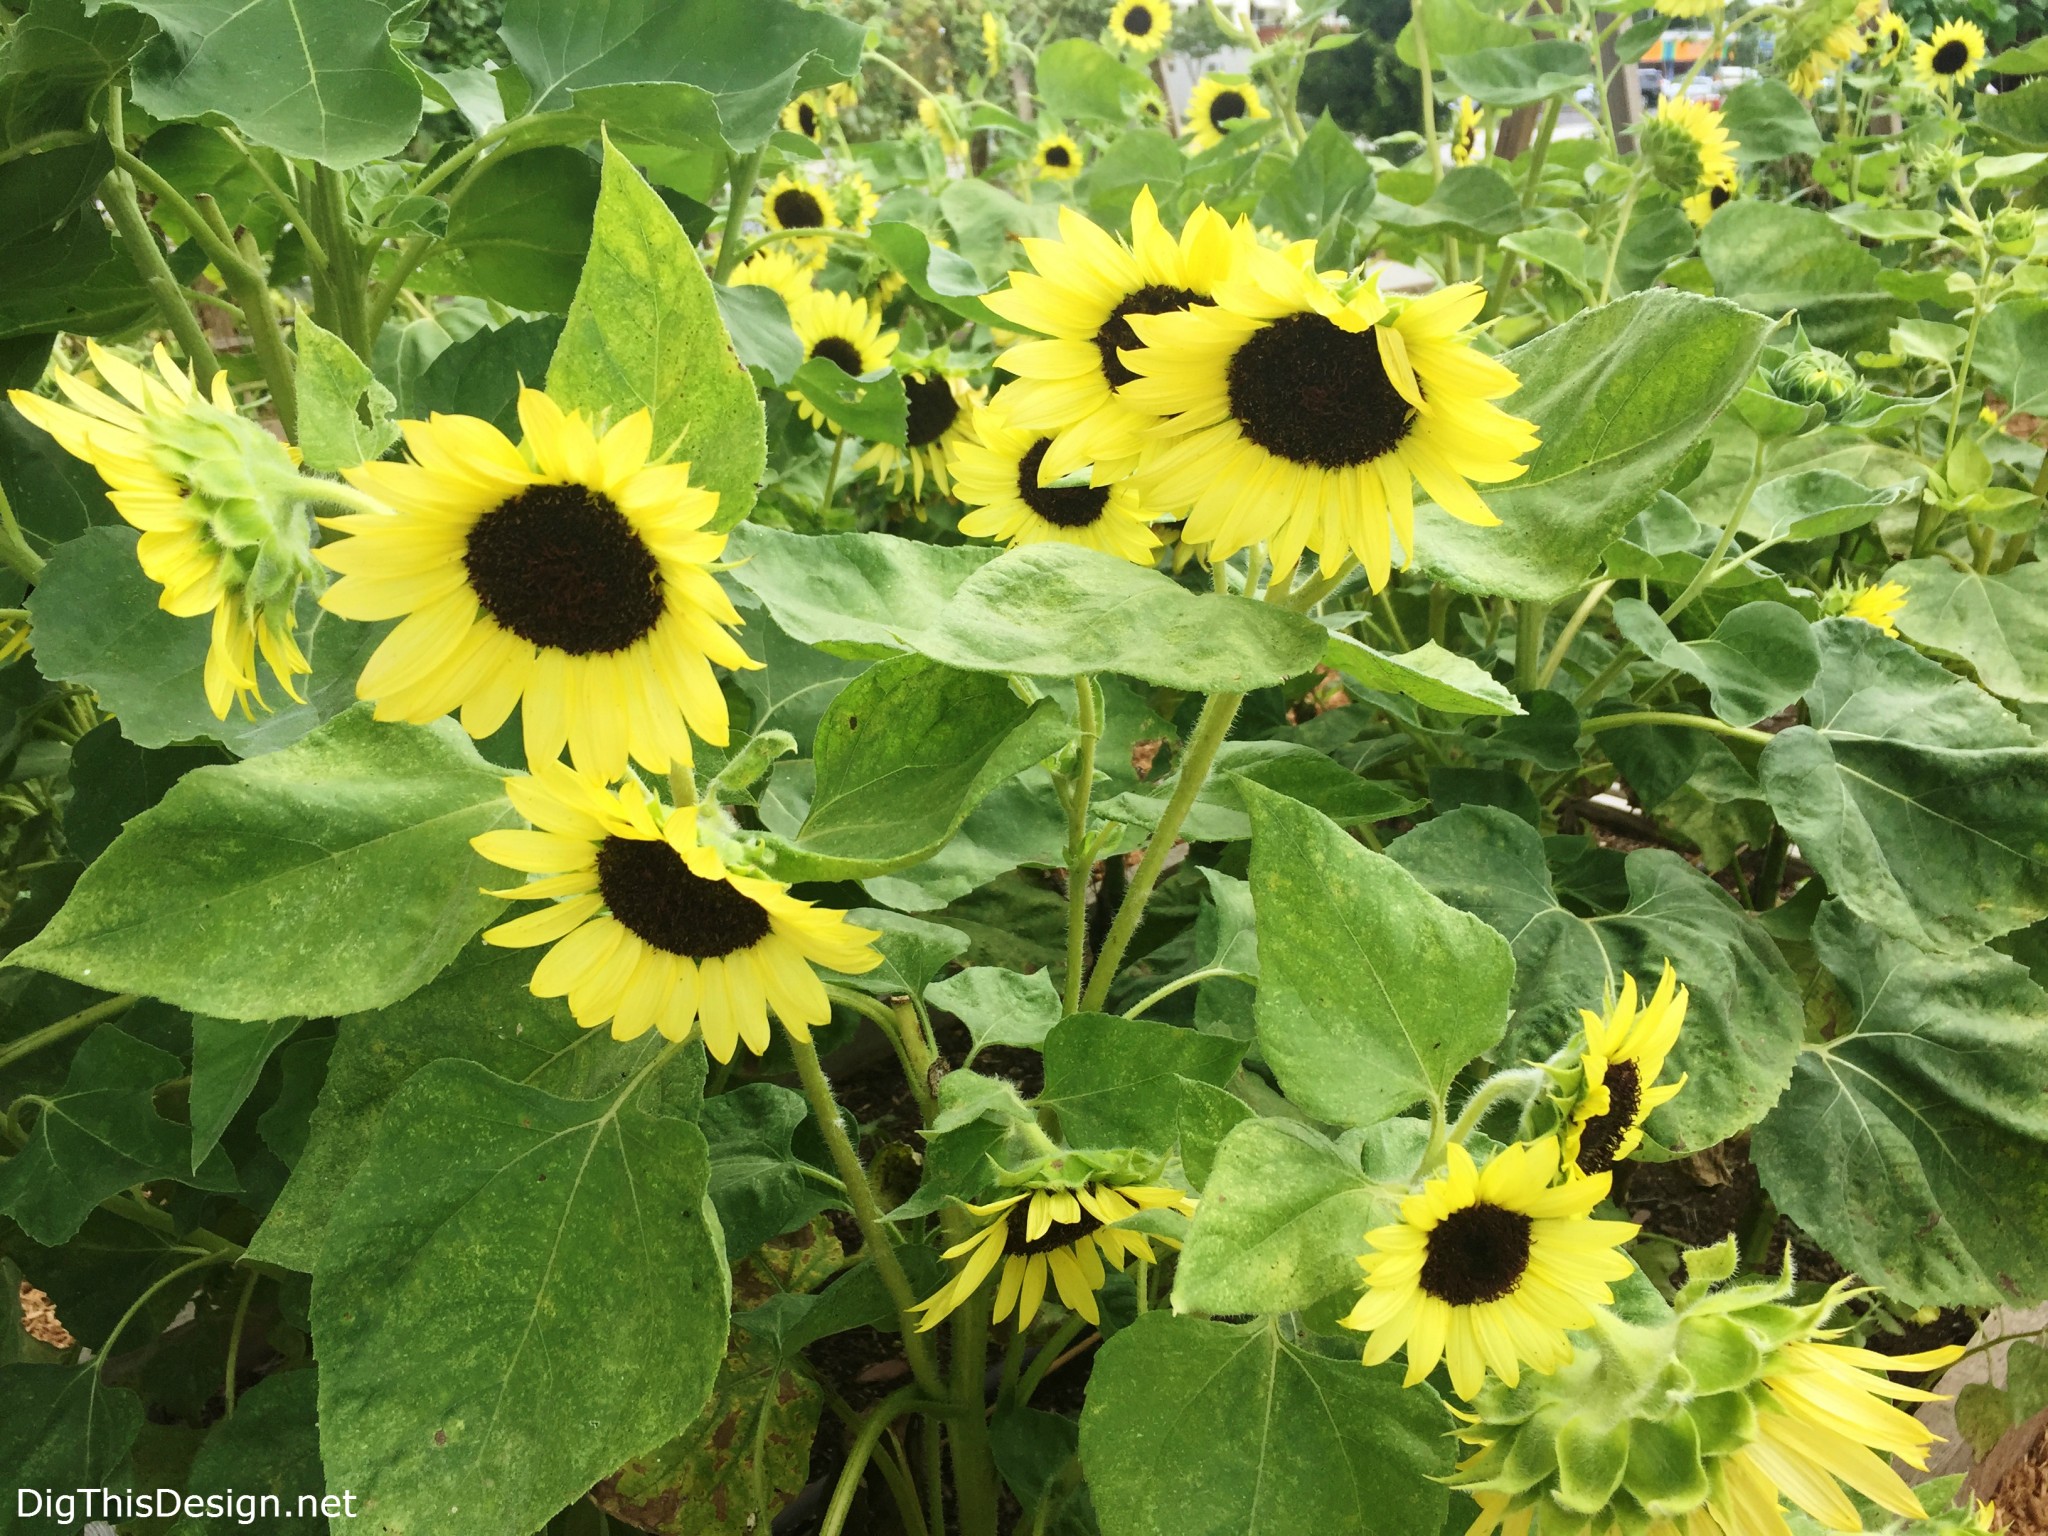 Sunflowers in food garden beds at East End Market